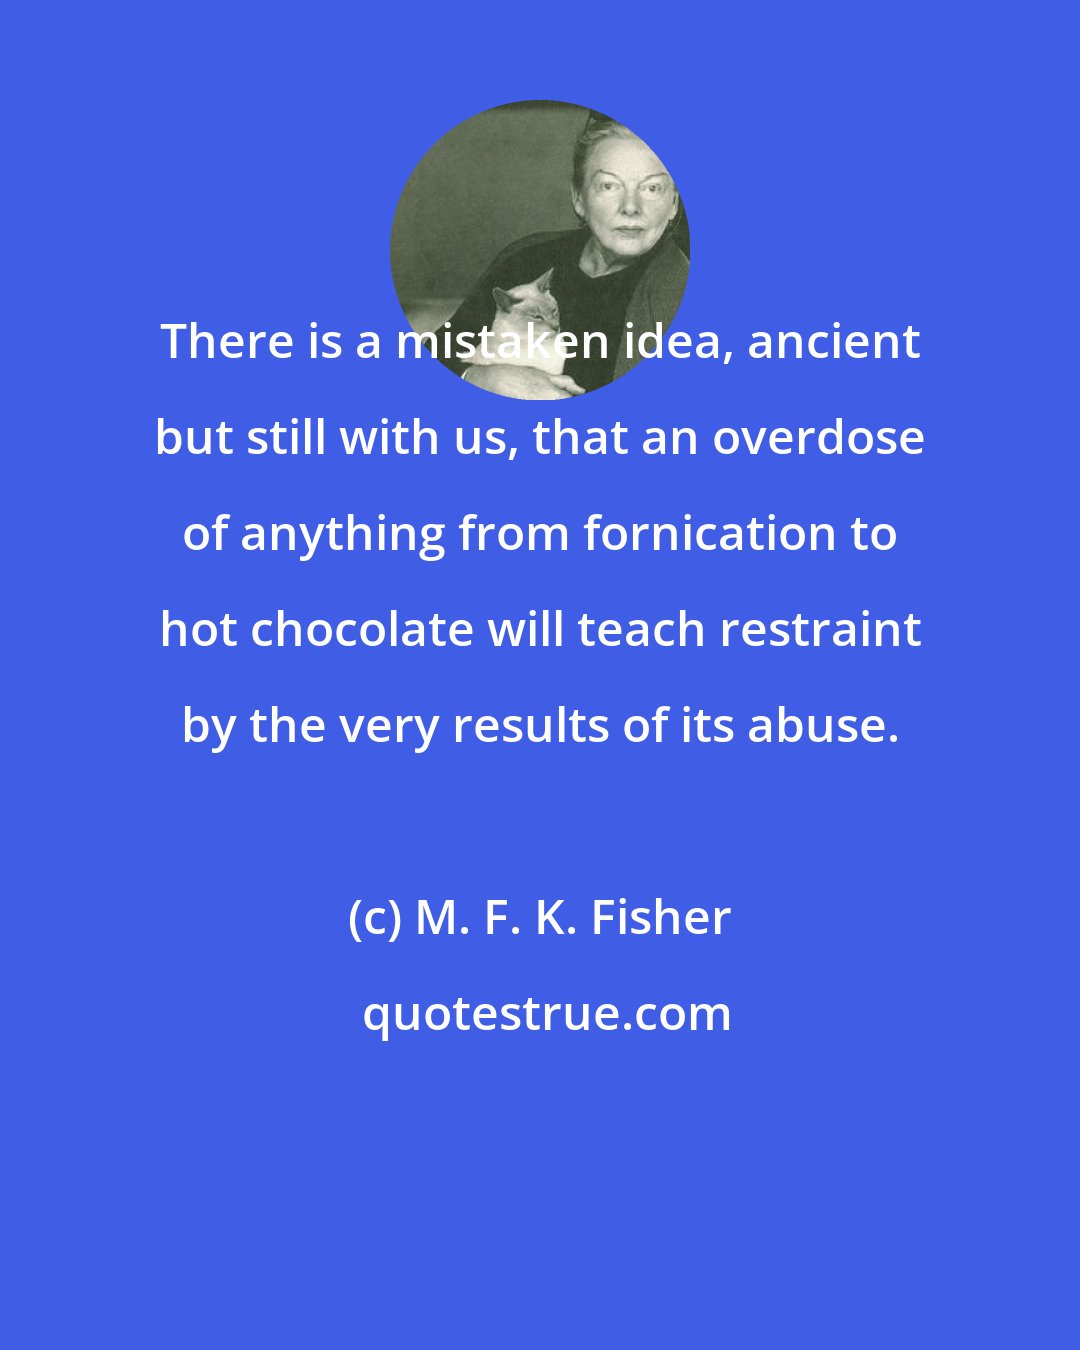 M. F. K. Fisher: There is a mistaken idea, ancient but still with us, that an overdose of anything from fornication to hot chocolate will teach restraint by the very results of its abuse.